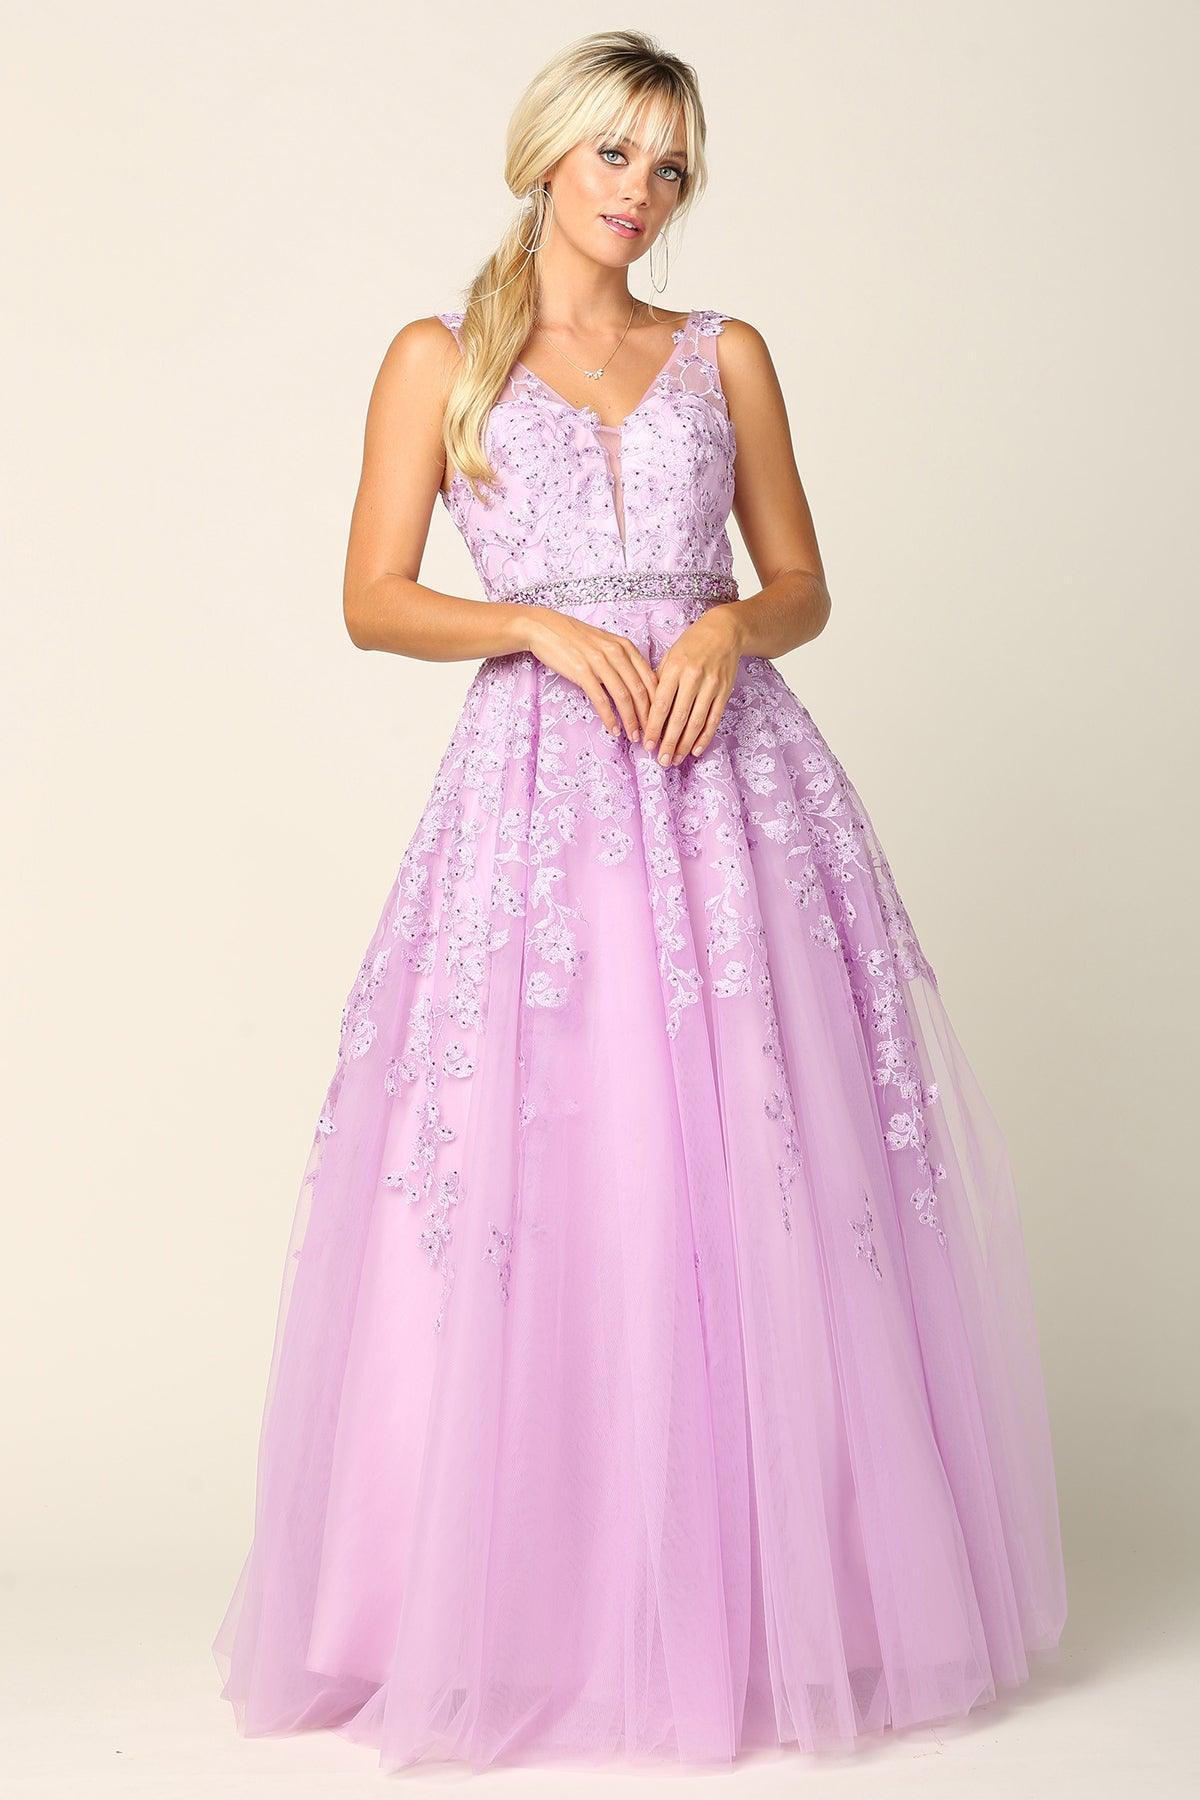 Long Formal Sleeveless Prom Ball Gown Sale - The Dress Outlet